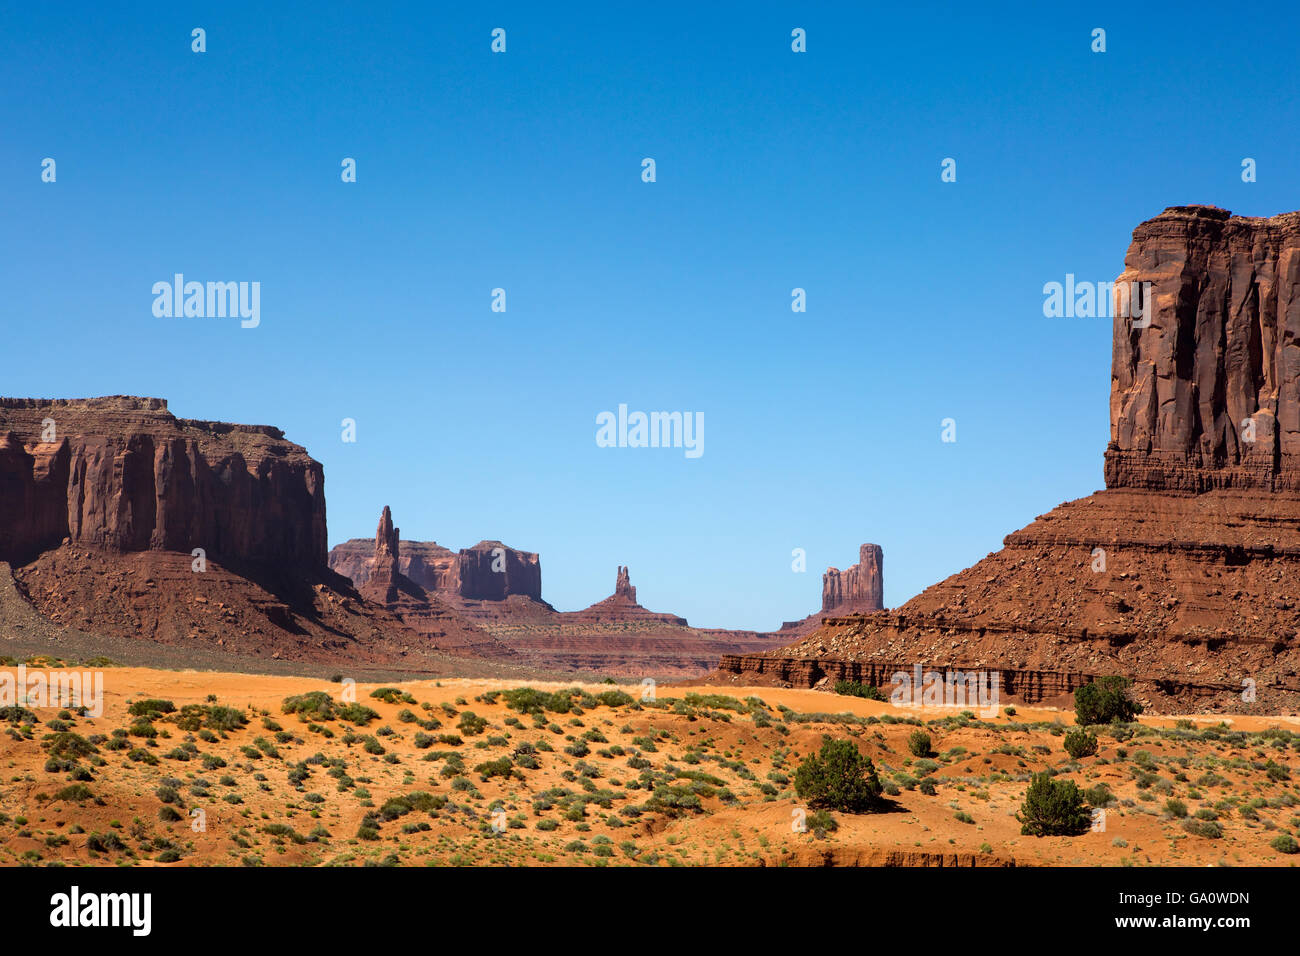 Sandstone mesas rise up out of the desert floor in Monument Valley, Utah, a part of the Navajo Indian Reservation. Stock Photo